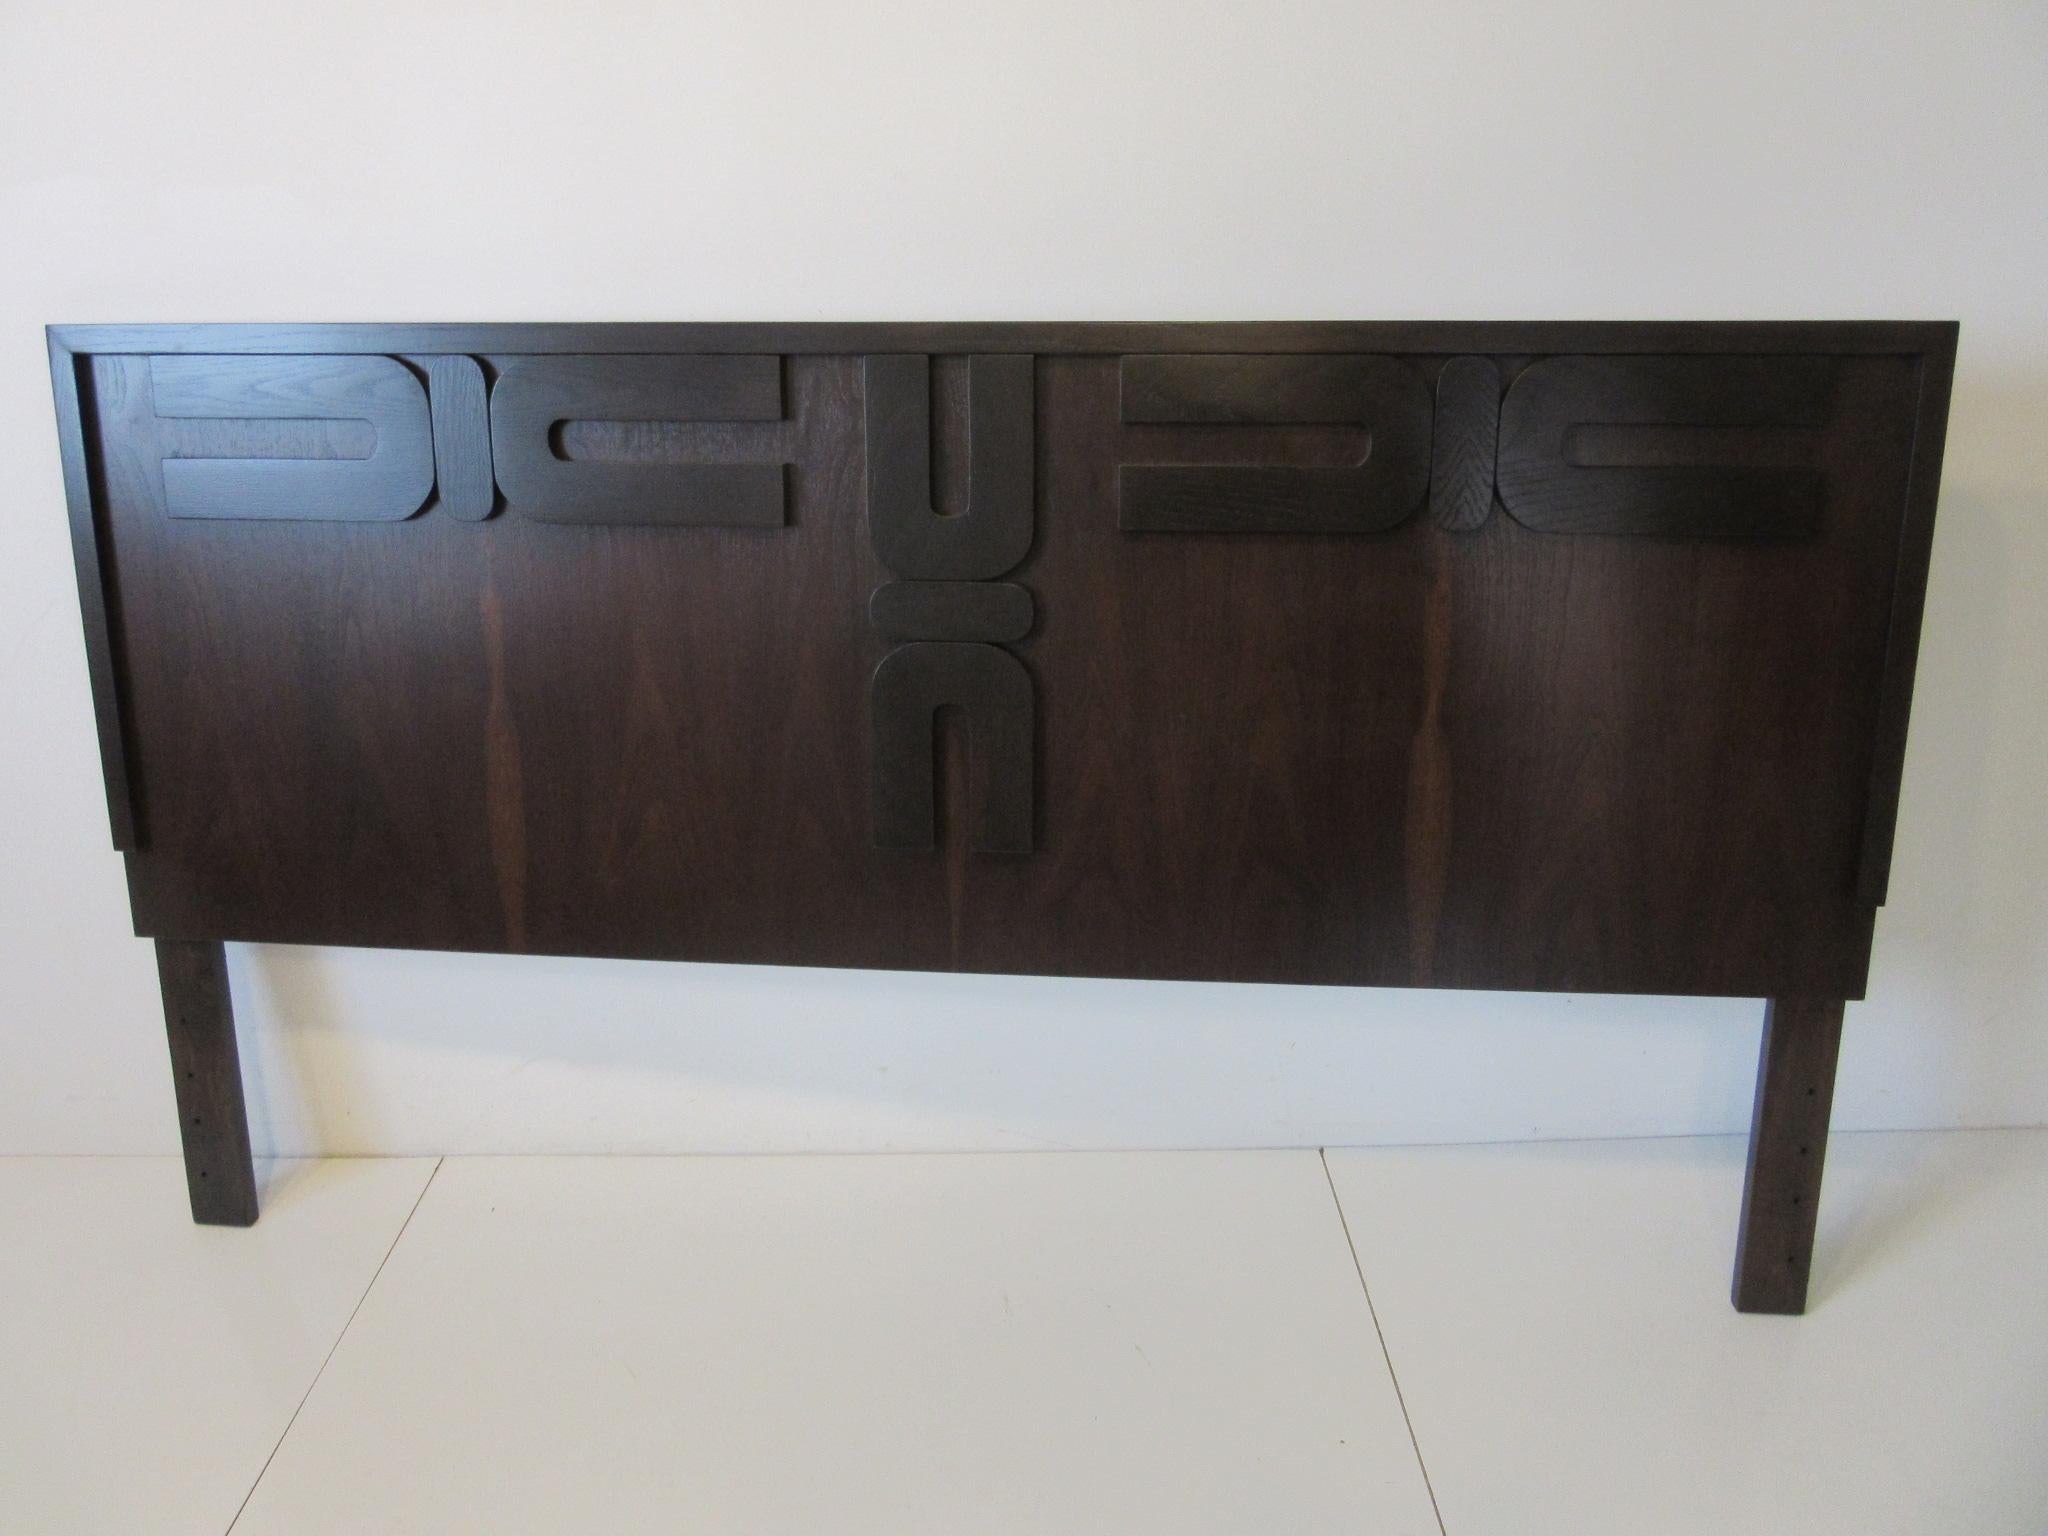 A ebony toned queen sized headboard with walnut backing having a dark and lighter affect to show off the wood grain. A Brutalist styled design application applied to the front gives this piece a subtle textured feeling of interest, manufactured in